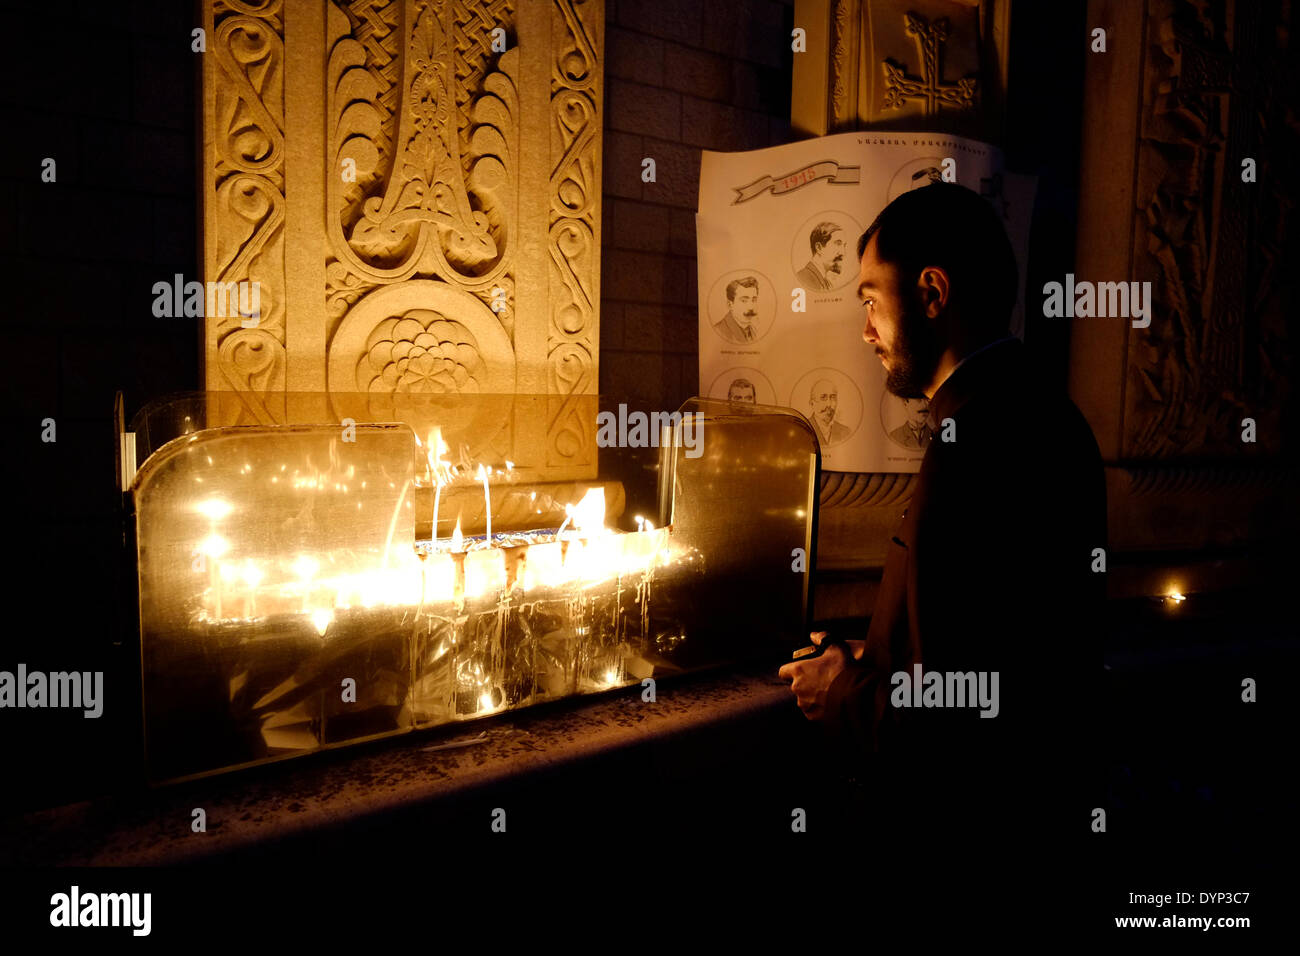 An Armenian priest lights candles at the Armenian Genocide memorial during commemoration ceremony of the 99th anniversary of the Armenian Genocide in the Armenian quarter Old city East Jerusalem Israel on 24  APRIL 2014. Genocide Remembrance Day or Genocide Memorial day, is observed by Armenians in dispersed communities around the world on April 24 . It is held annually to commemorate the victims of the Armenian Genocide from 1915 to 1923. Stock Photo